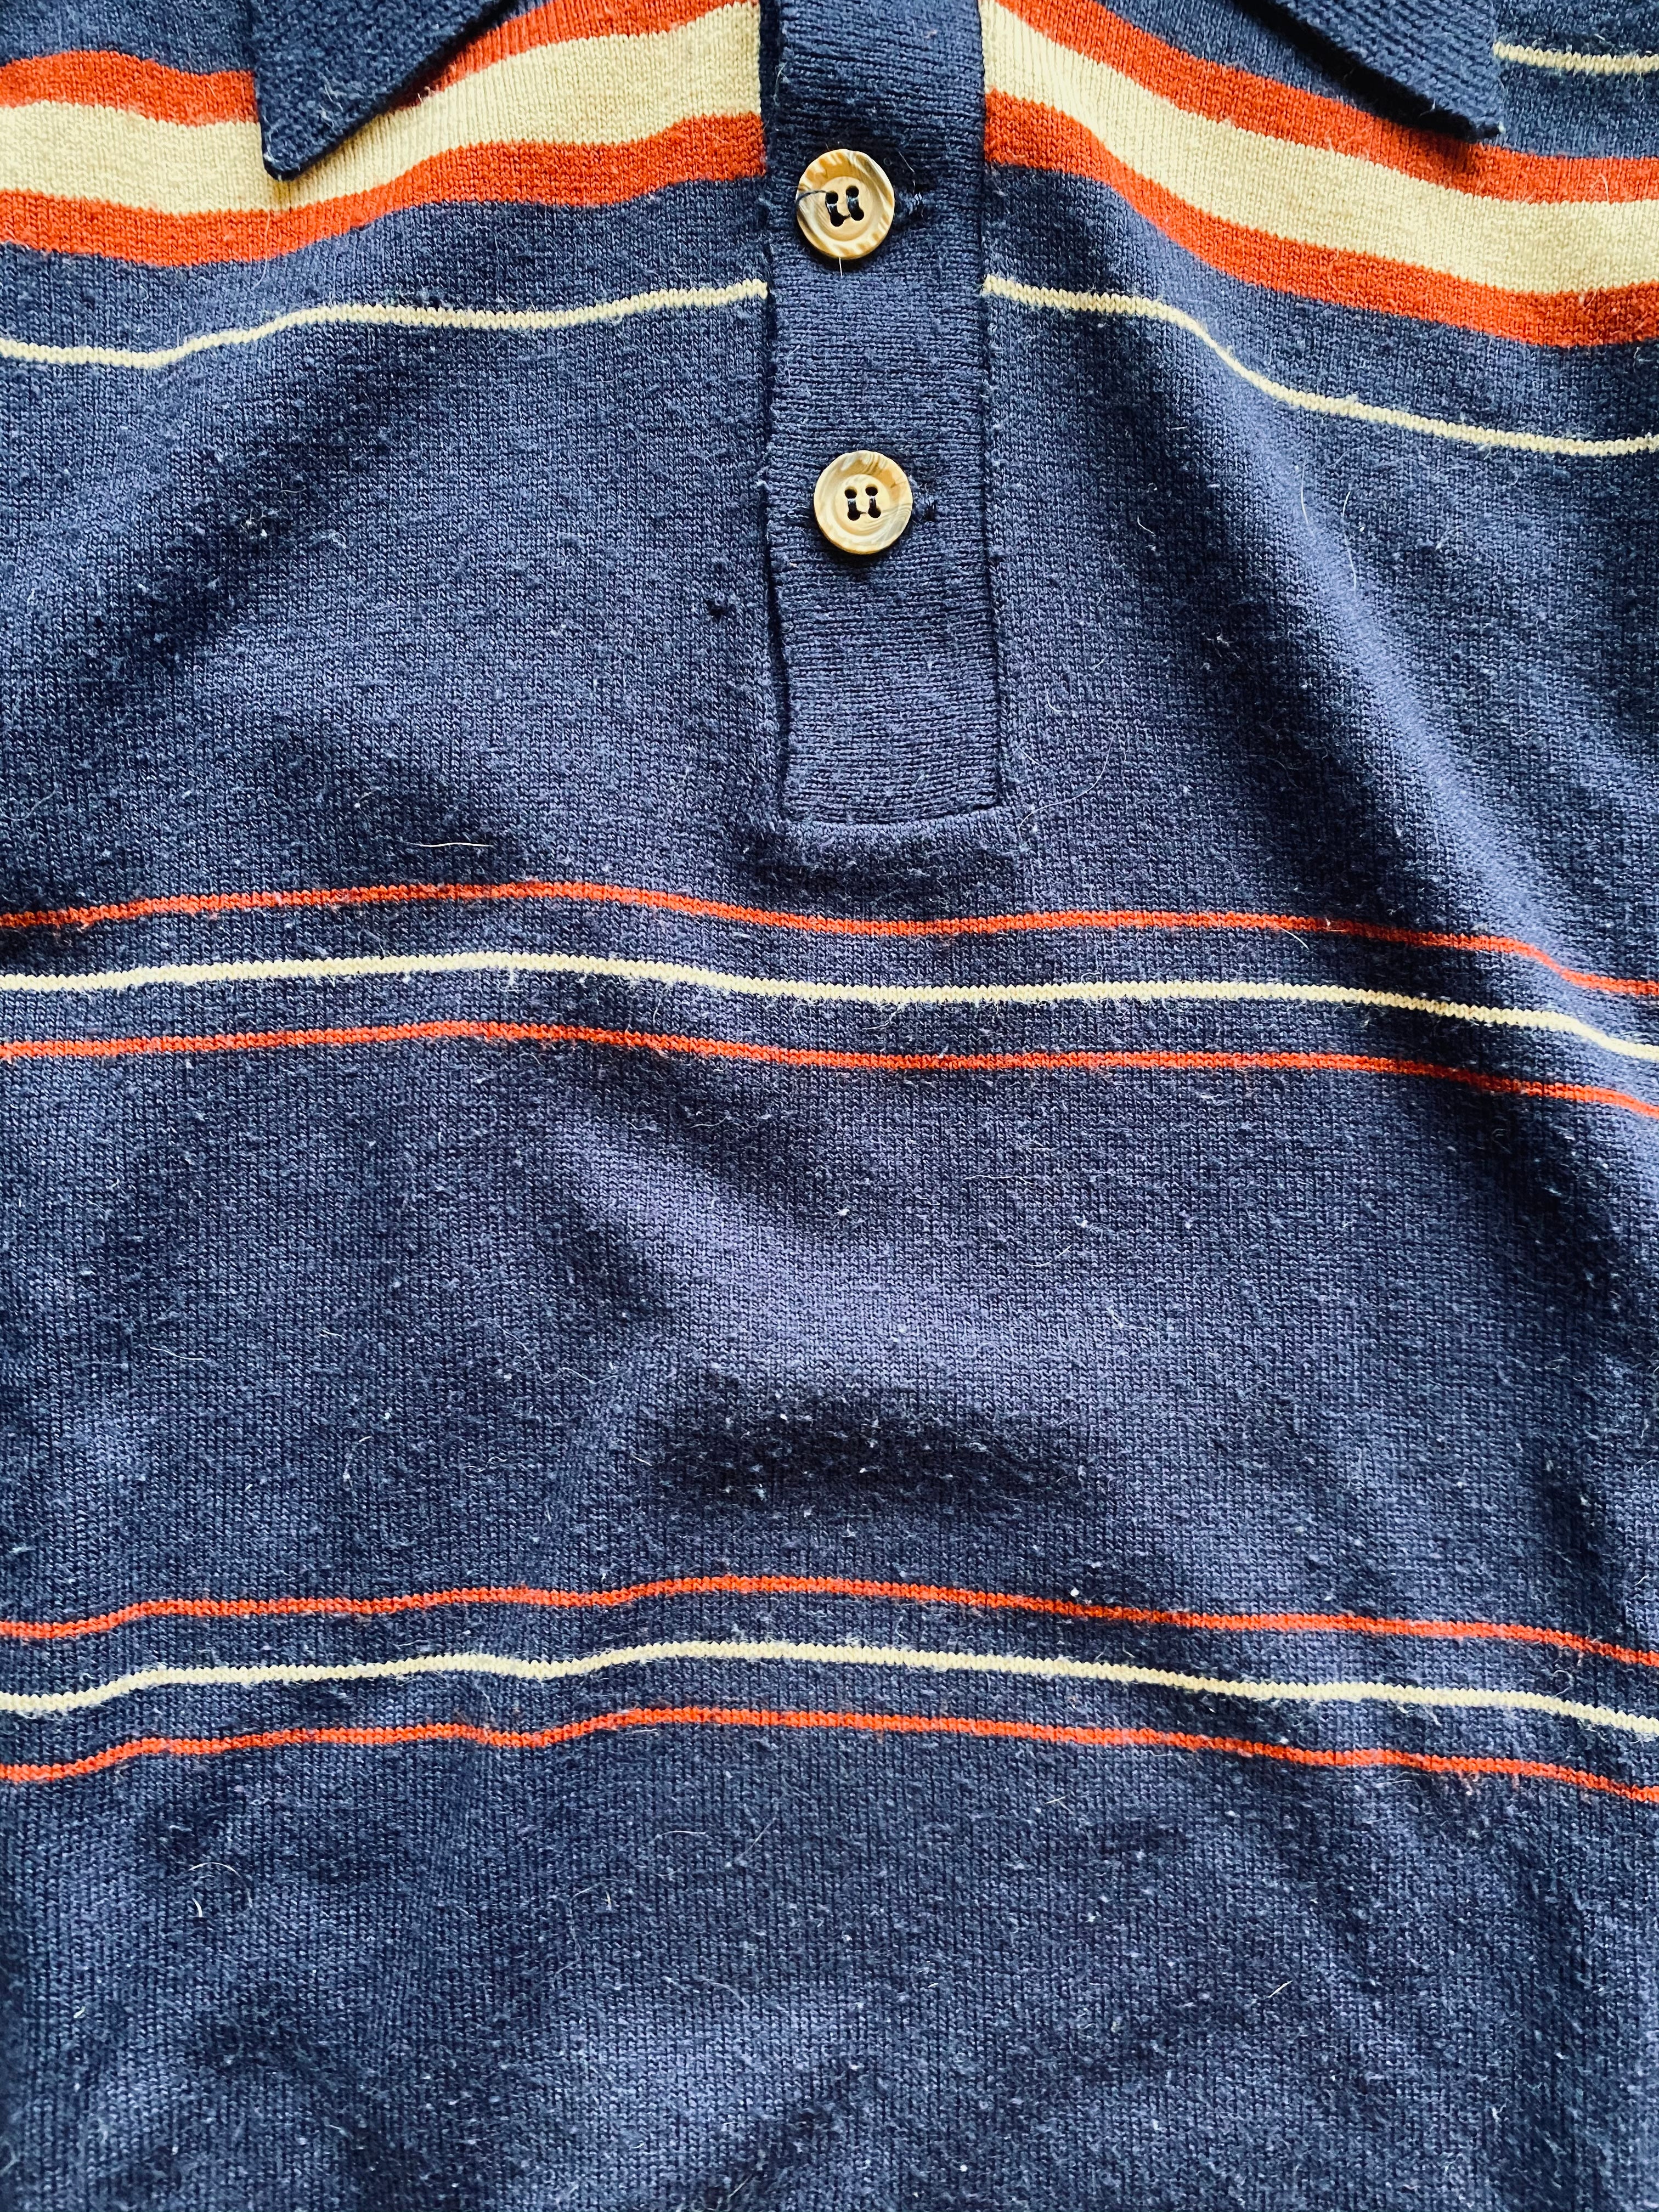 1970s JCPenny Polo Knit Sweater | X-Large